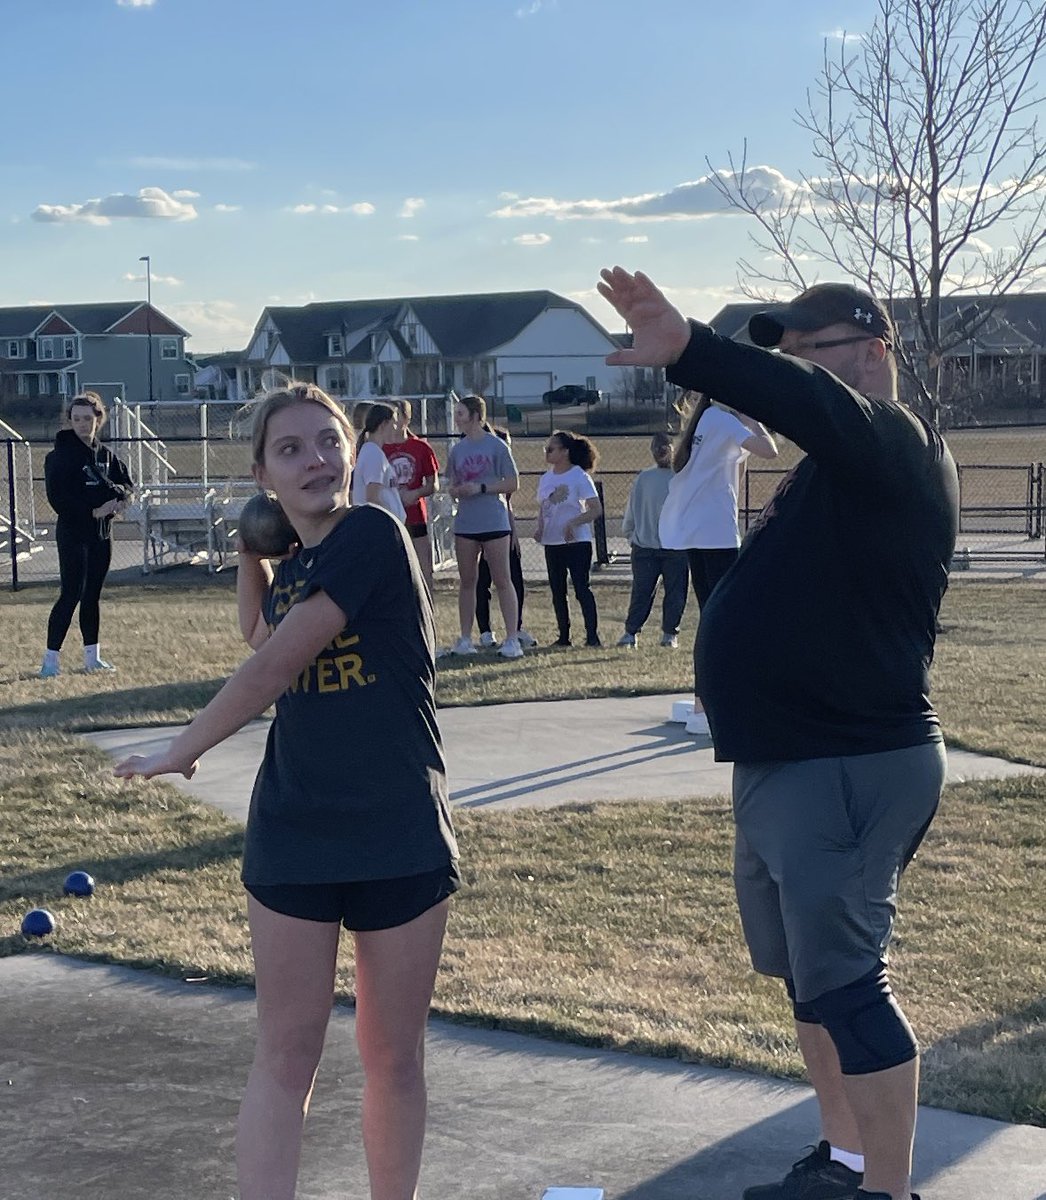 Coach Sammons has been a great help with the throwers this year! He is technically one of the 8th boys assistants, but has thoughtfully and willingly shared his time with our girls as well!! They have shown great growth, and we are really thankful for all of his help!